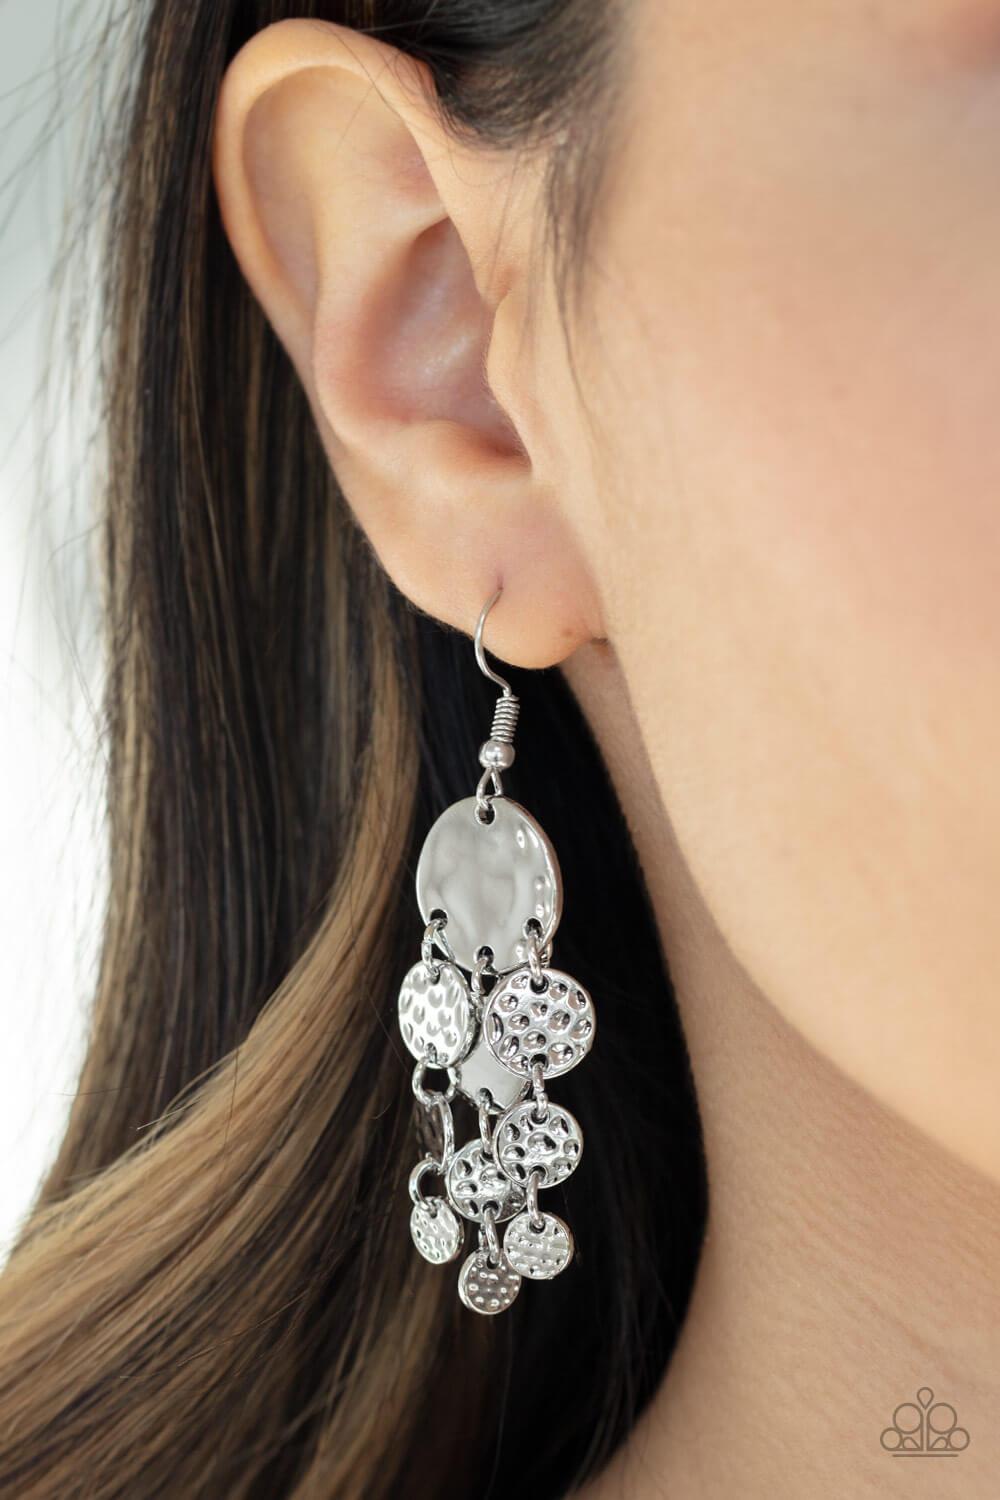 Do Chime In - Silver Earrings - Princess Glam Shop